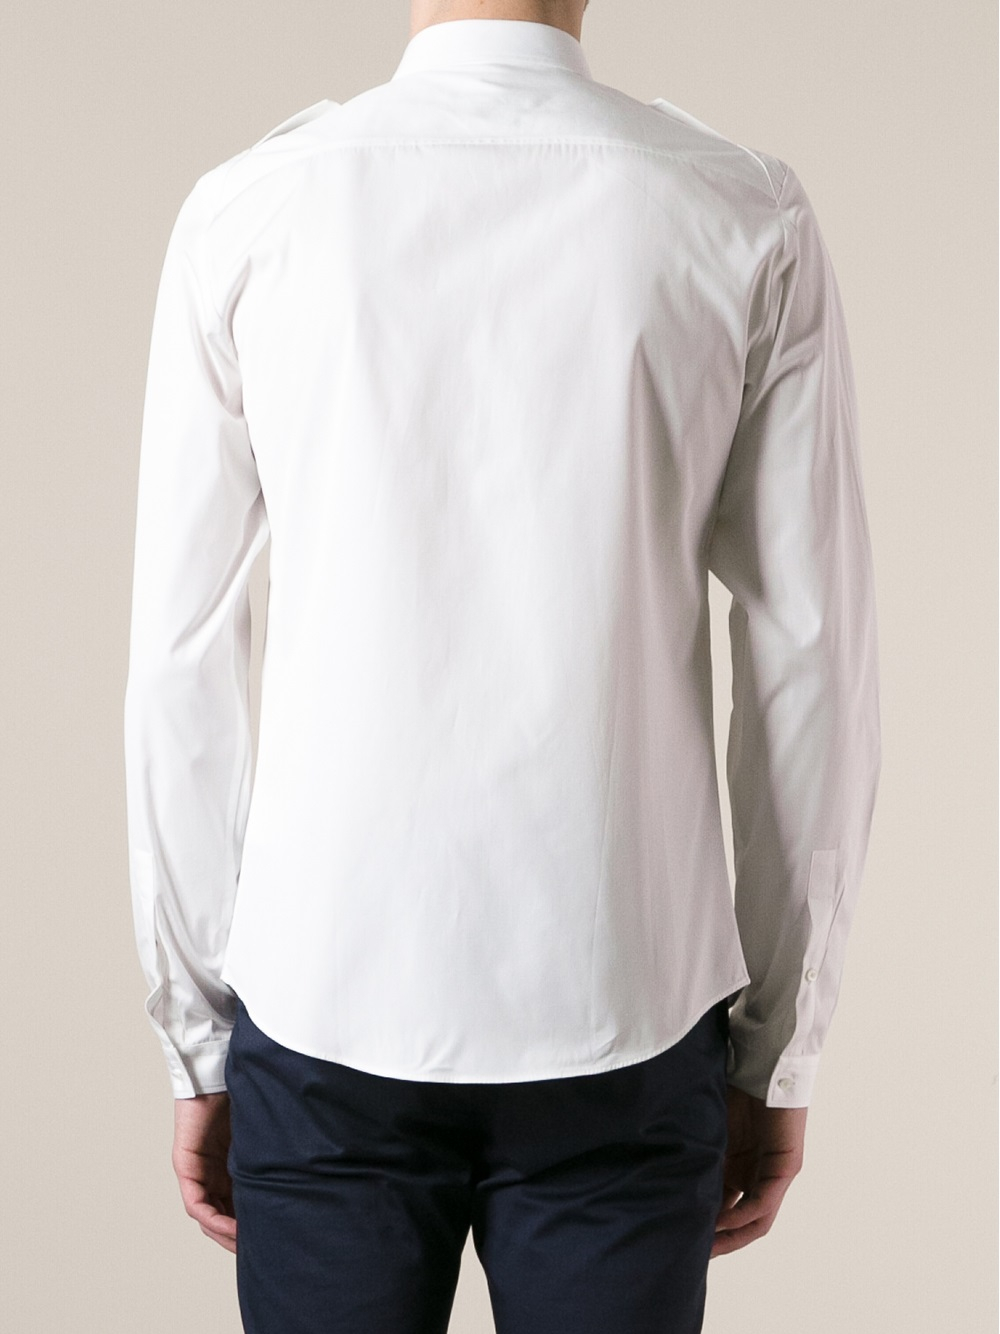 Lyst - Gucci Plain Shirt in White for Men